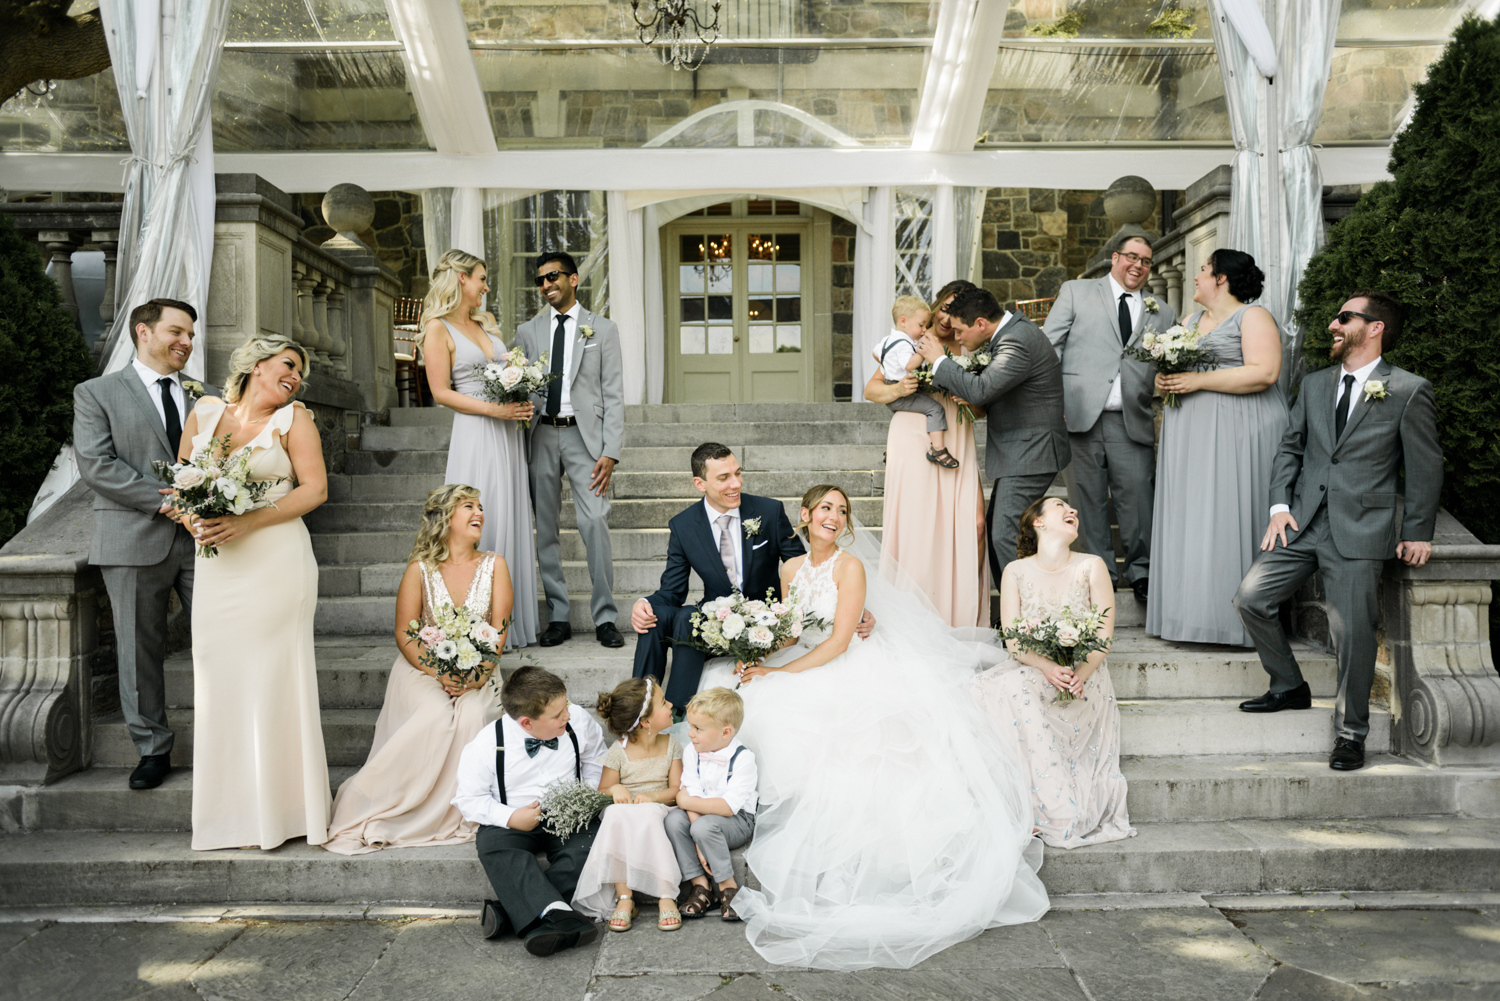 Bridal party on the steps of the Graydon Hall terrace